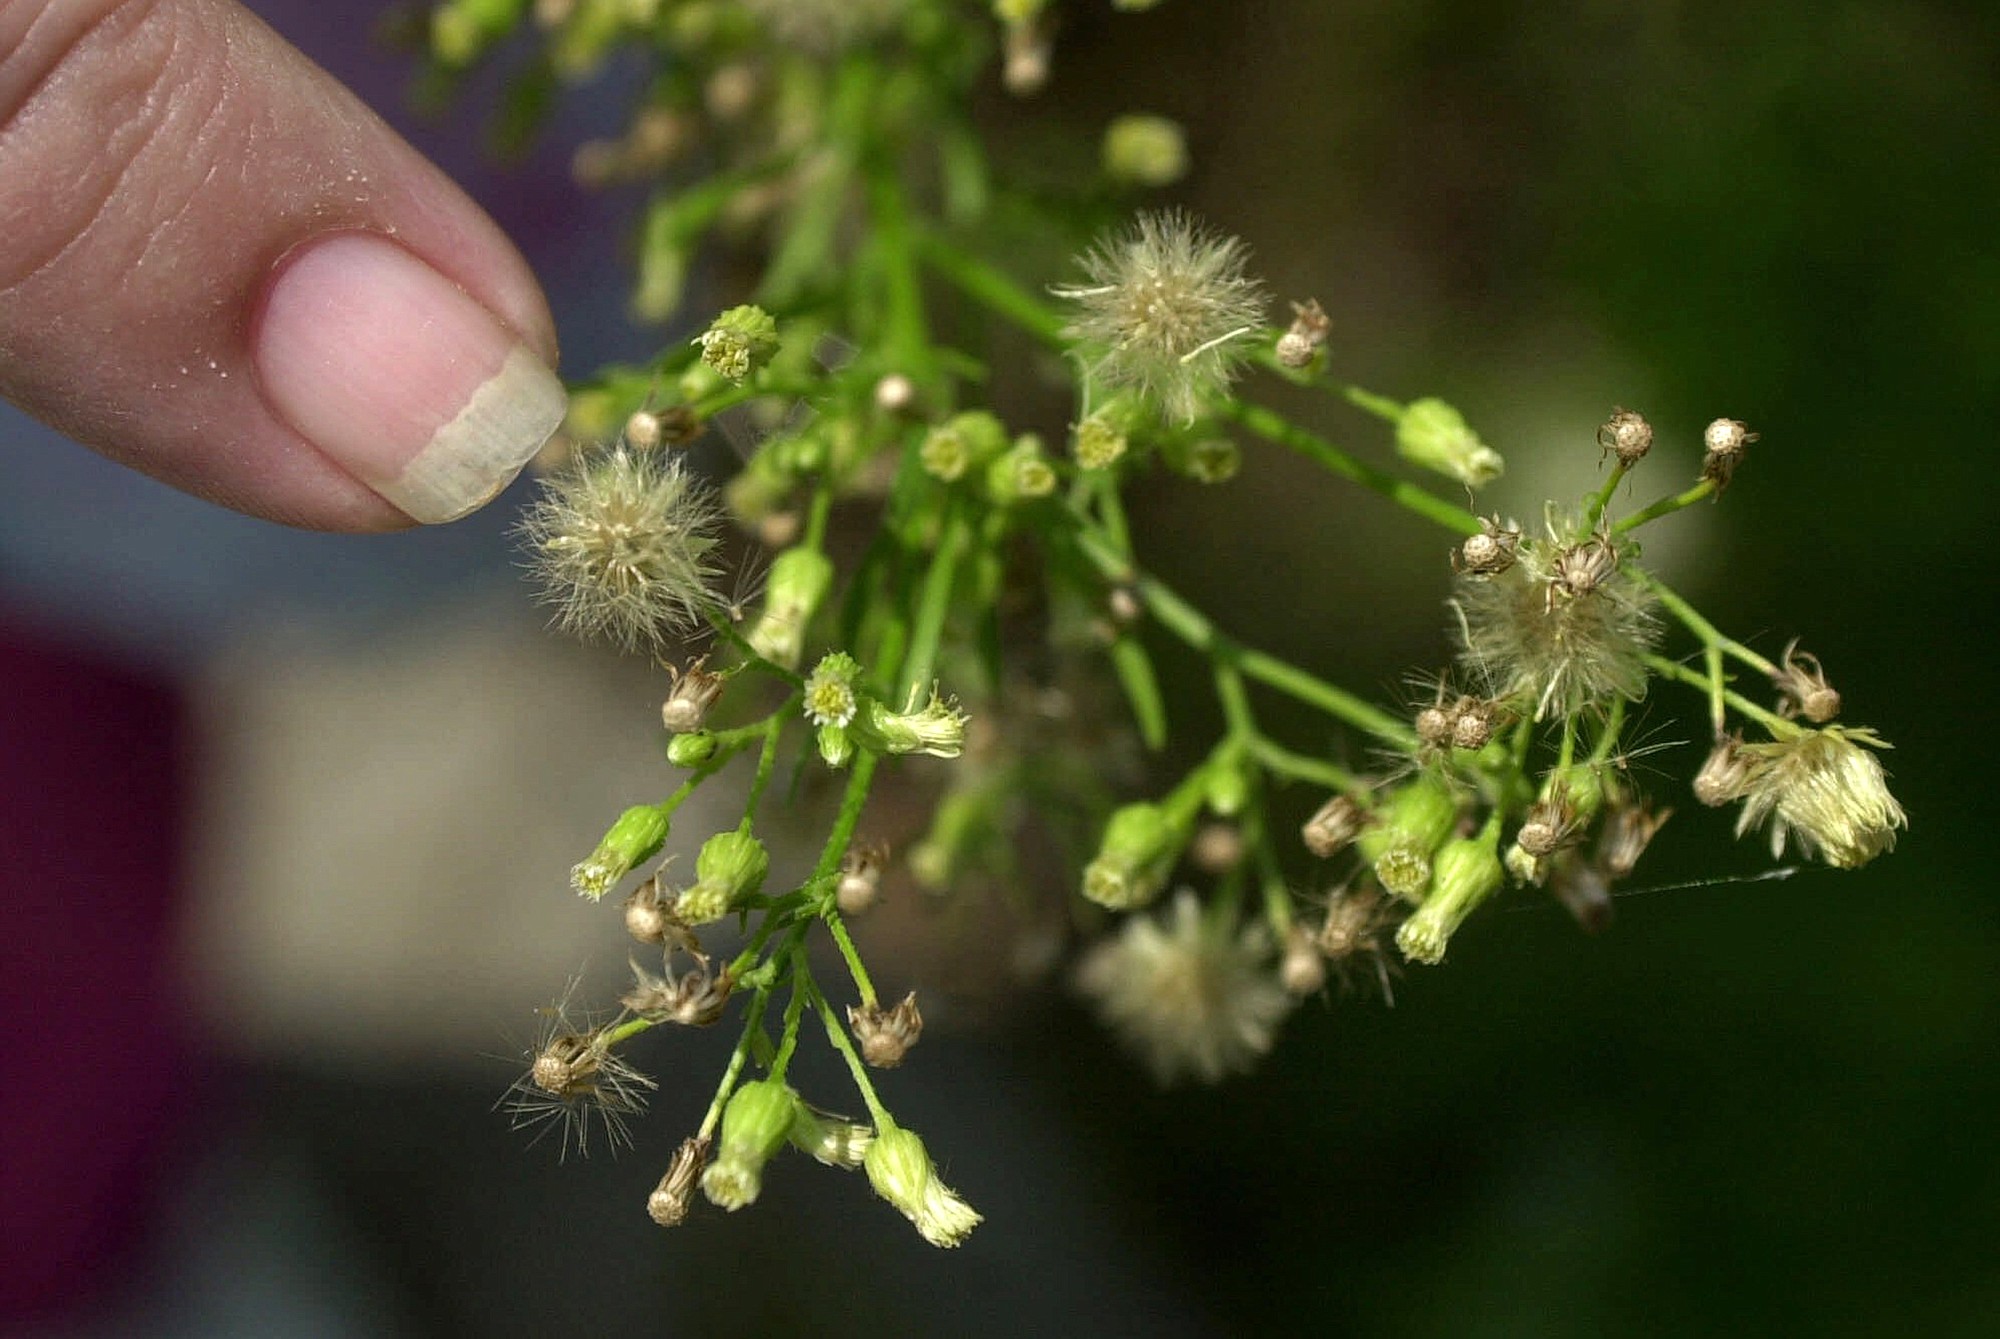 Pollen on a ragweed plant in is seen Newark, N.J. A new study says global warming will bring much more sneezing and wheezing to Europe by mid-century.